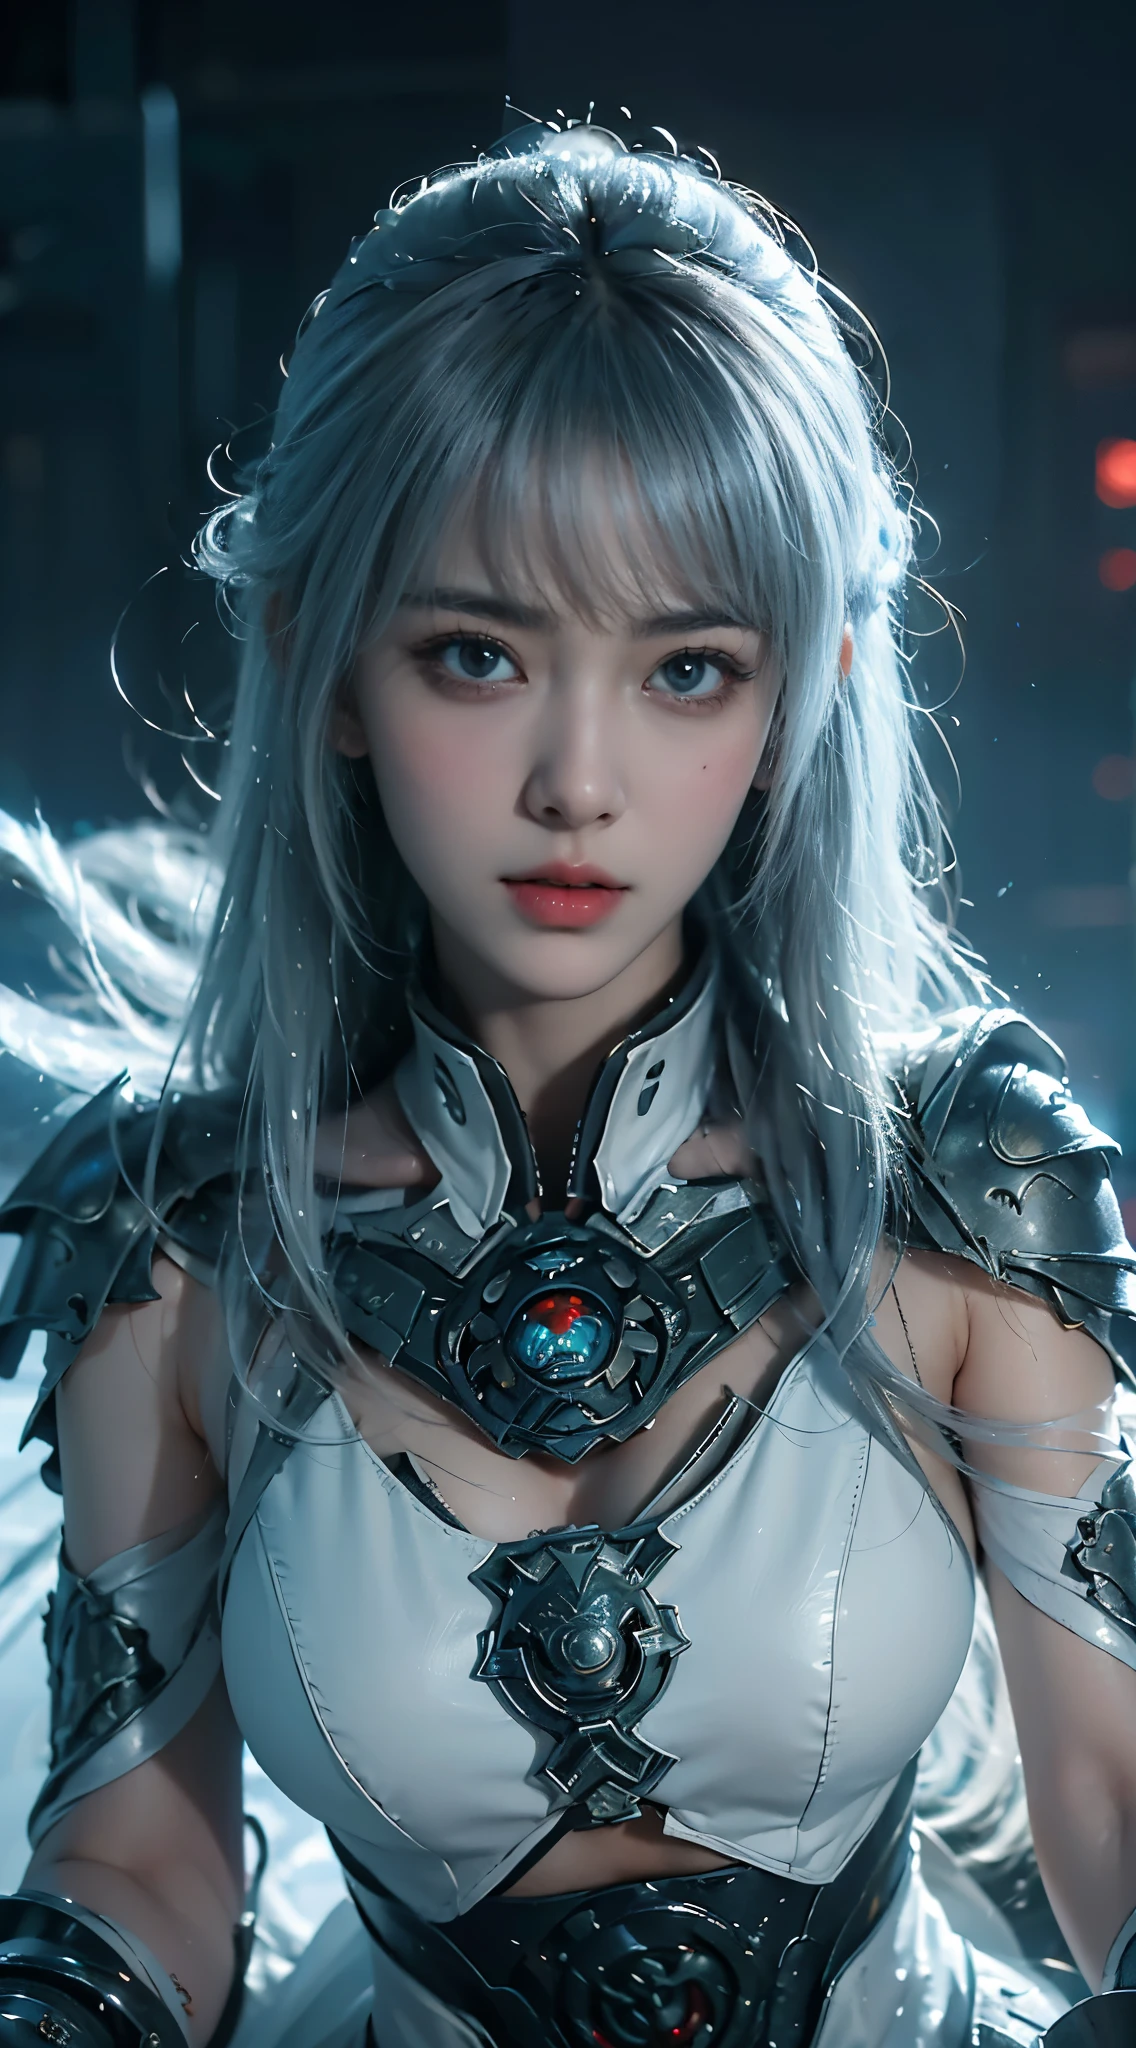 masterpiece,best quality,high resolution,8k,(portrait photo:1.5),(R original photo),real picture,digital photography,(Combination of cyberpunk and fantasy style),(female soldier),20 year old girl,Random hairstyle,white hair,through bangs,(red eye breasts, Accessories,Keep your mouth shut,Elegant and charming,Serious and arrogant,Calm and handsome,(Cyberpunk combined with fantasy style clothing,hollow-carved design,joint armor,combat uniform,White clothes,White color your belly button,photo poses,Realistic style,gray world background,oc render reflection texture